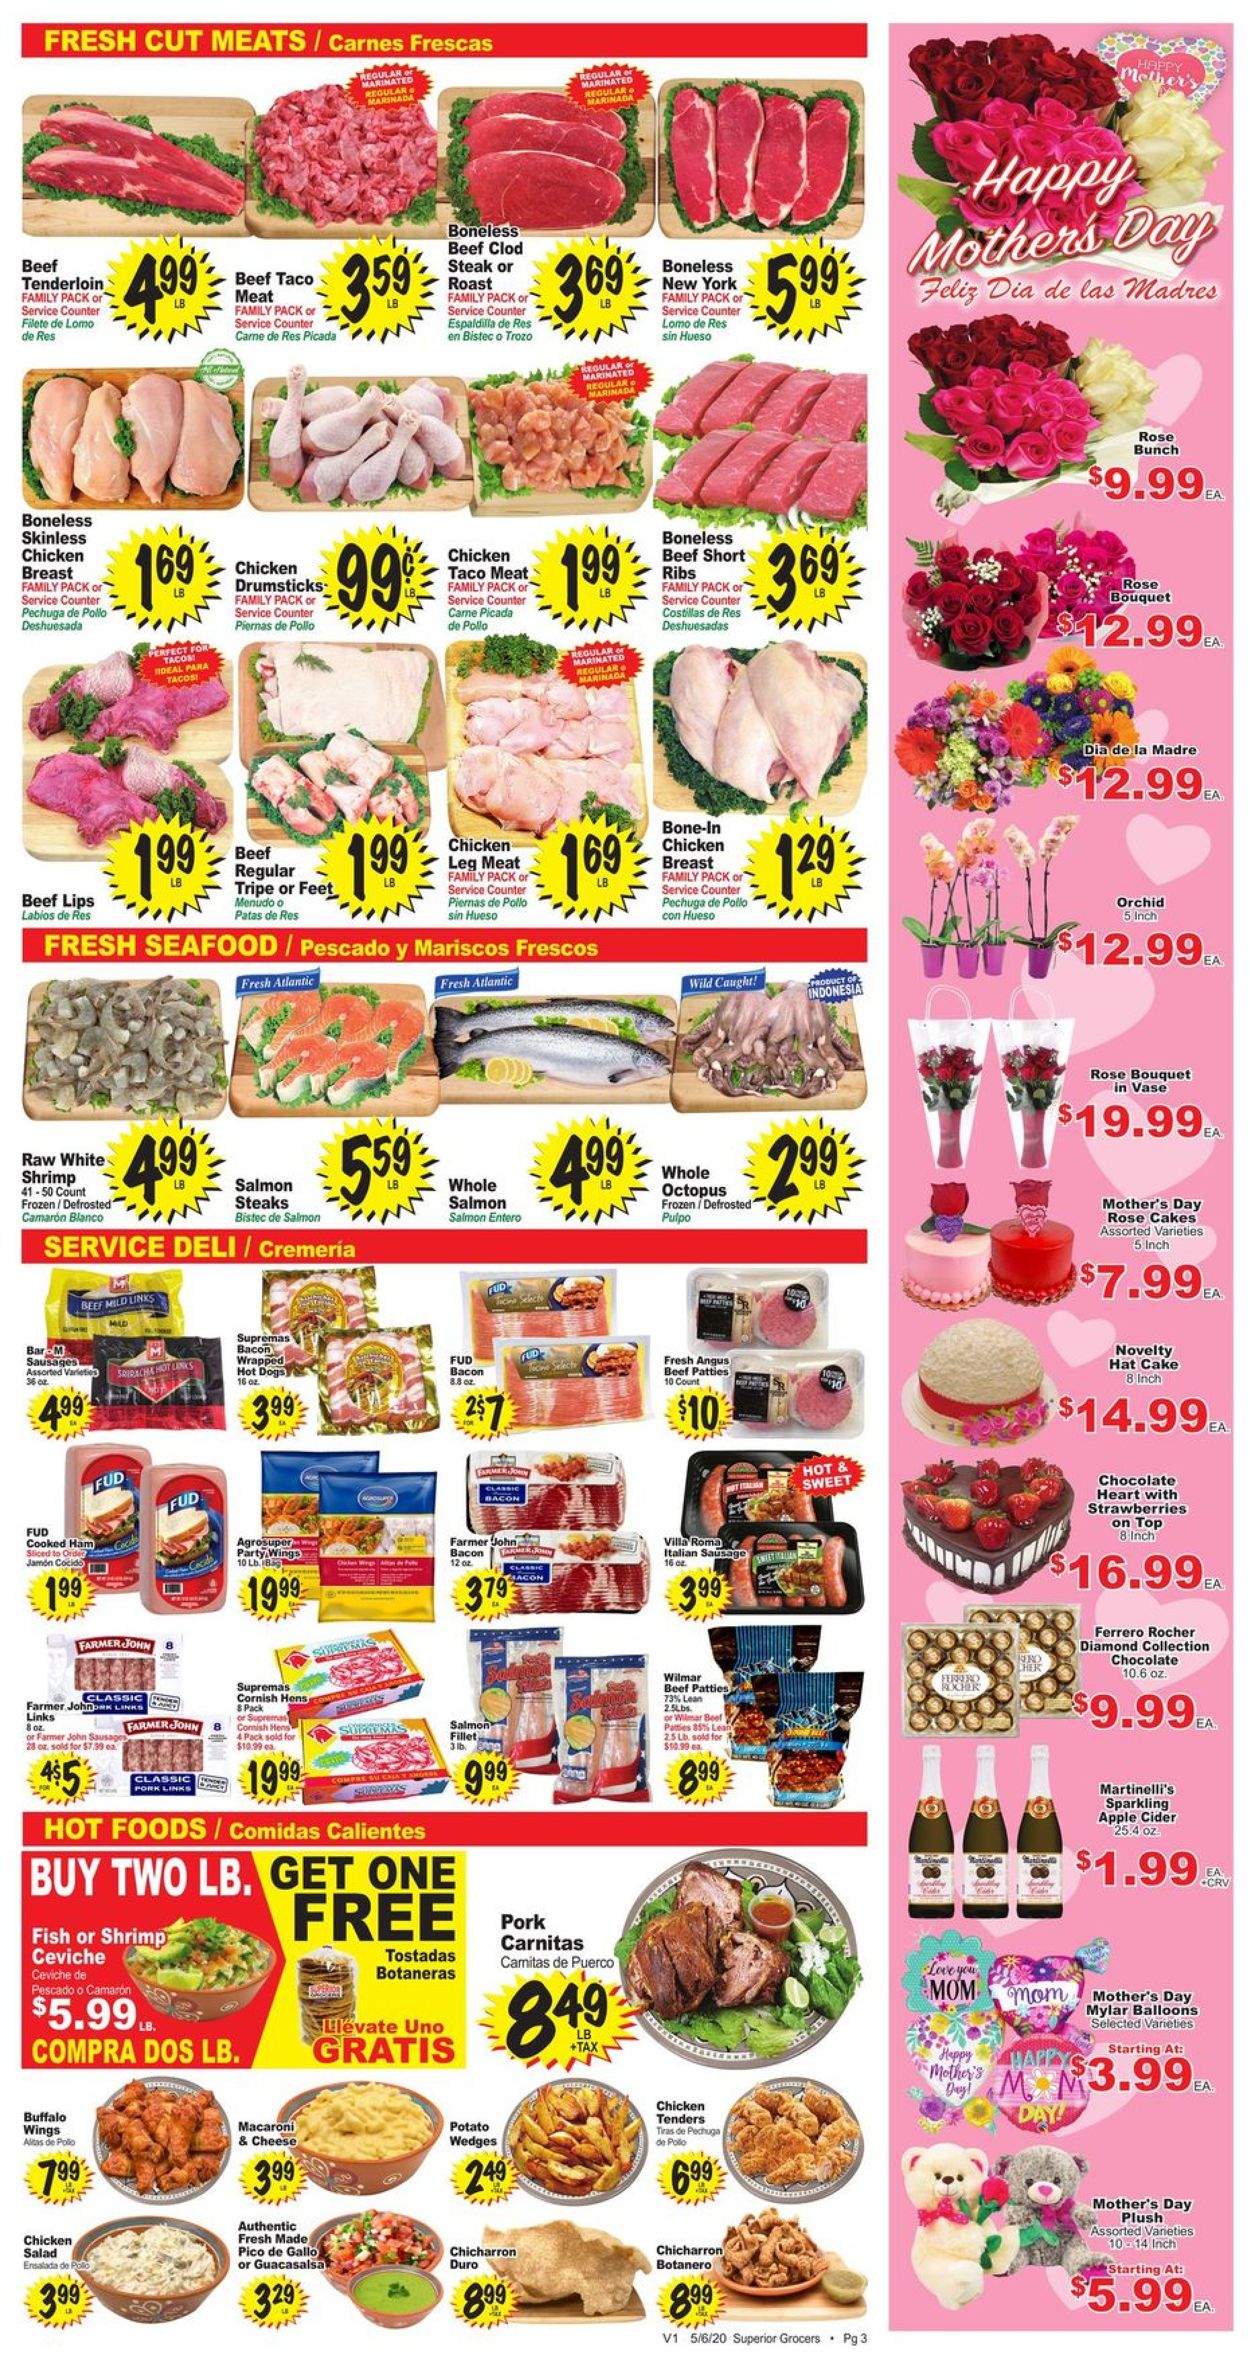 Catalogue Superior Grocers from 05/06/2020